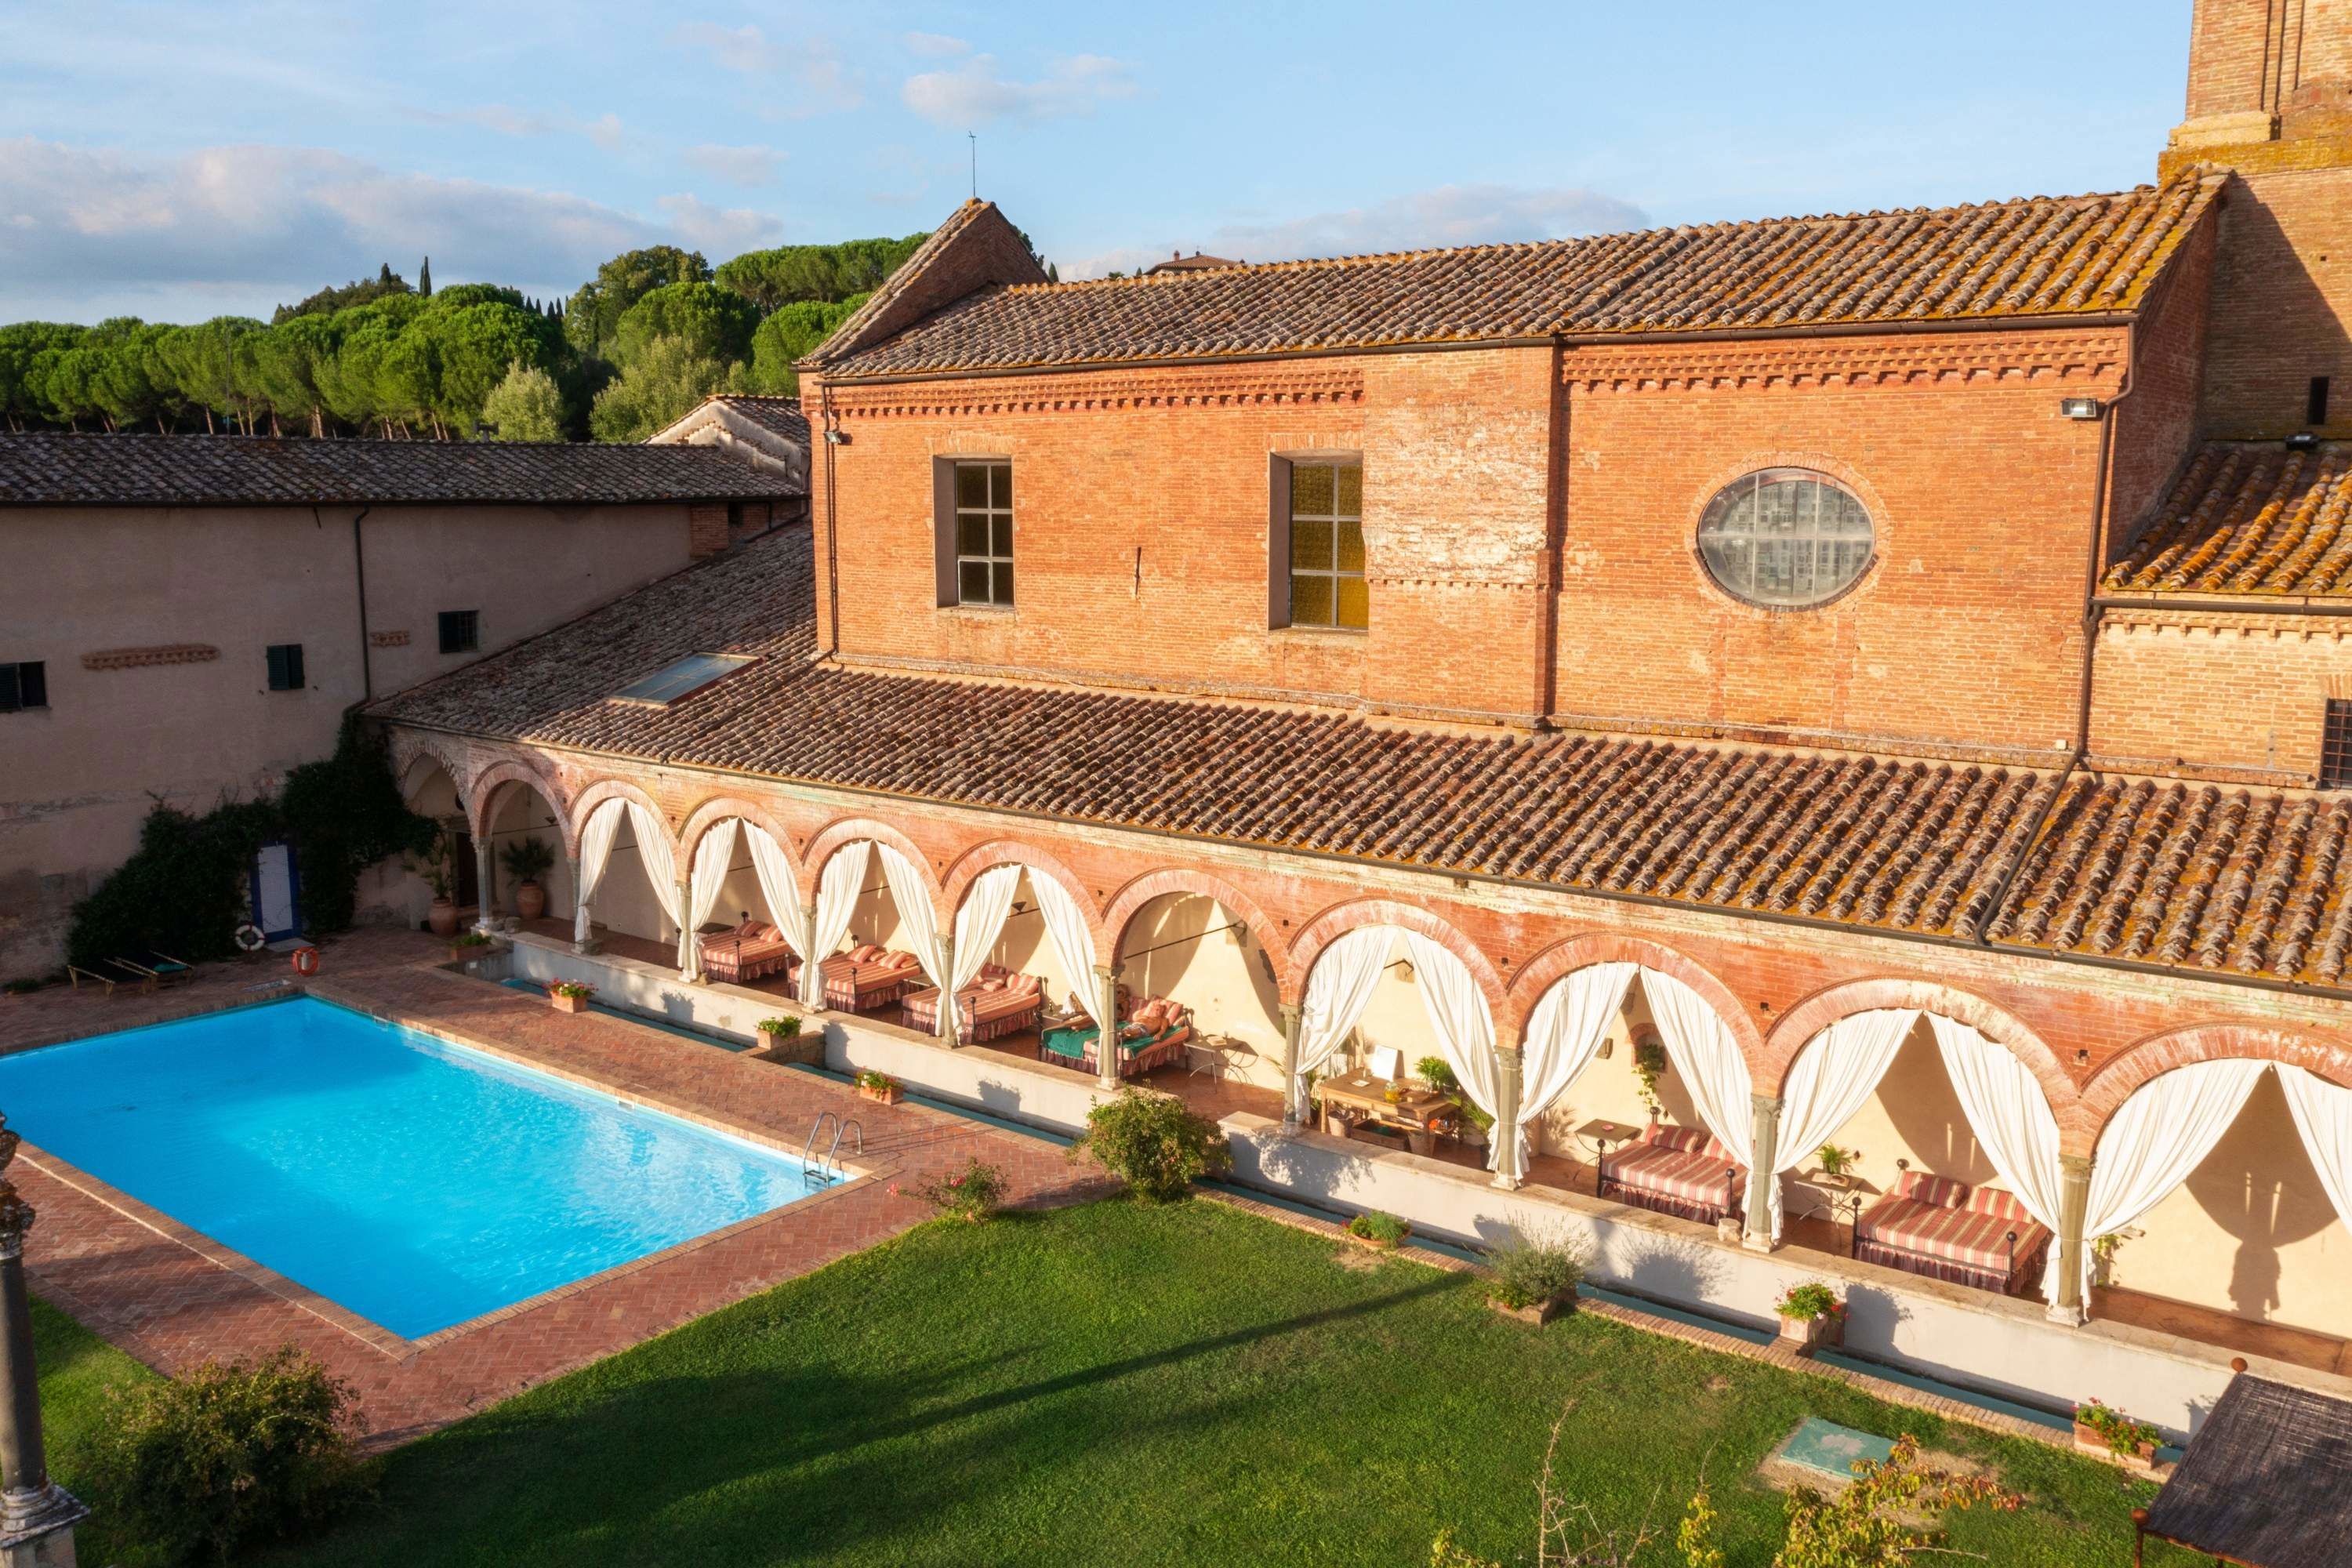 A boutique hotel with a familiar touch, hidden in the Tuscan countryside. 6